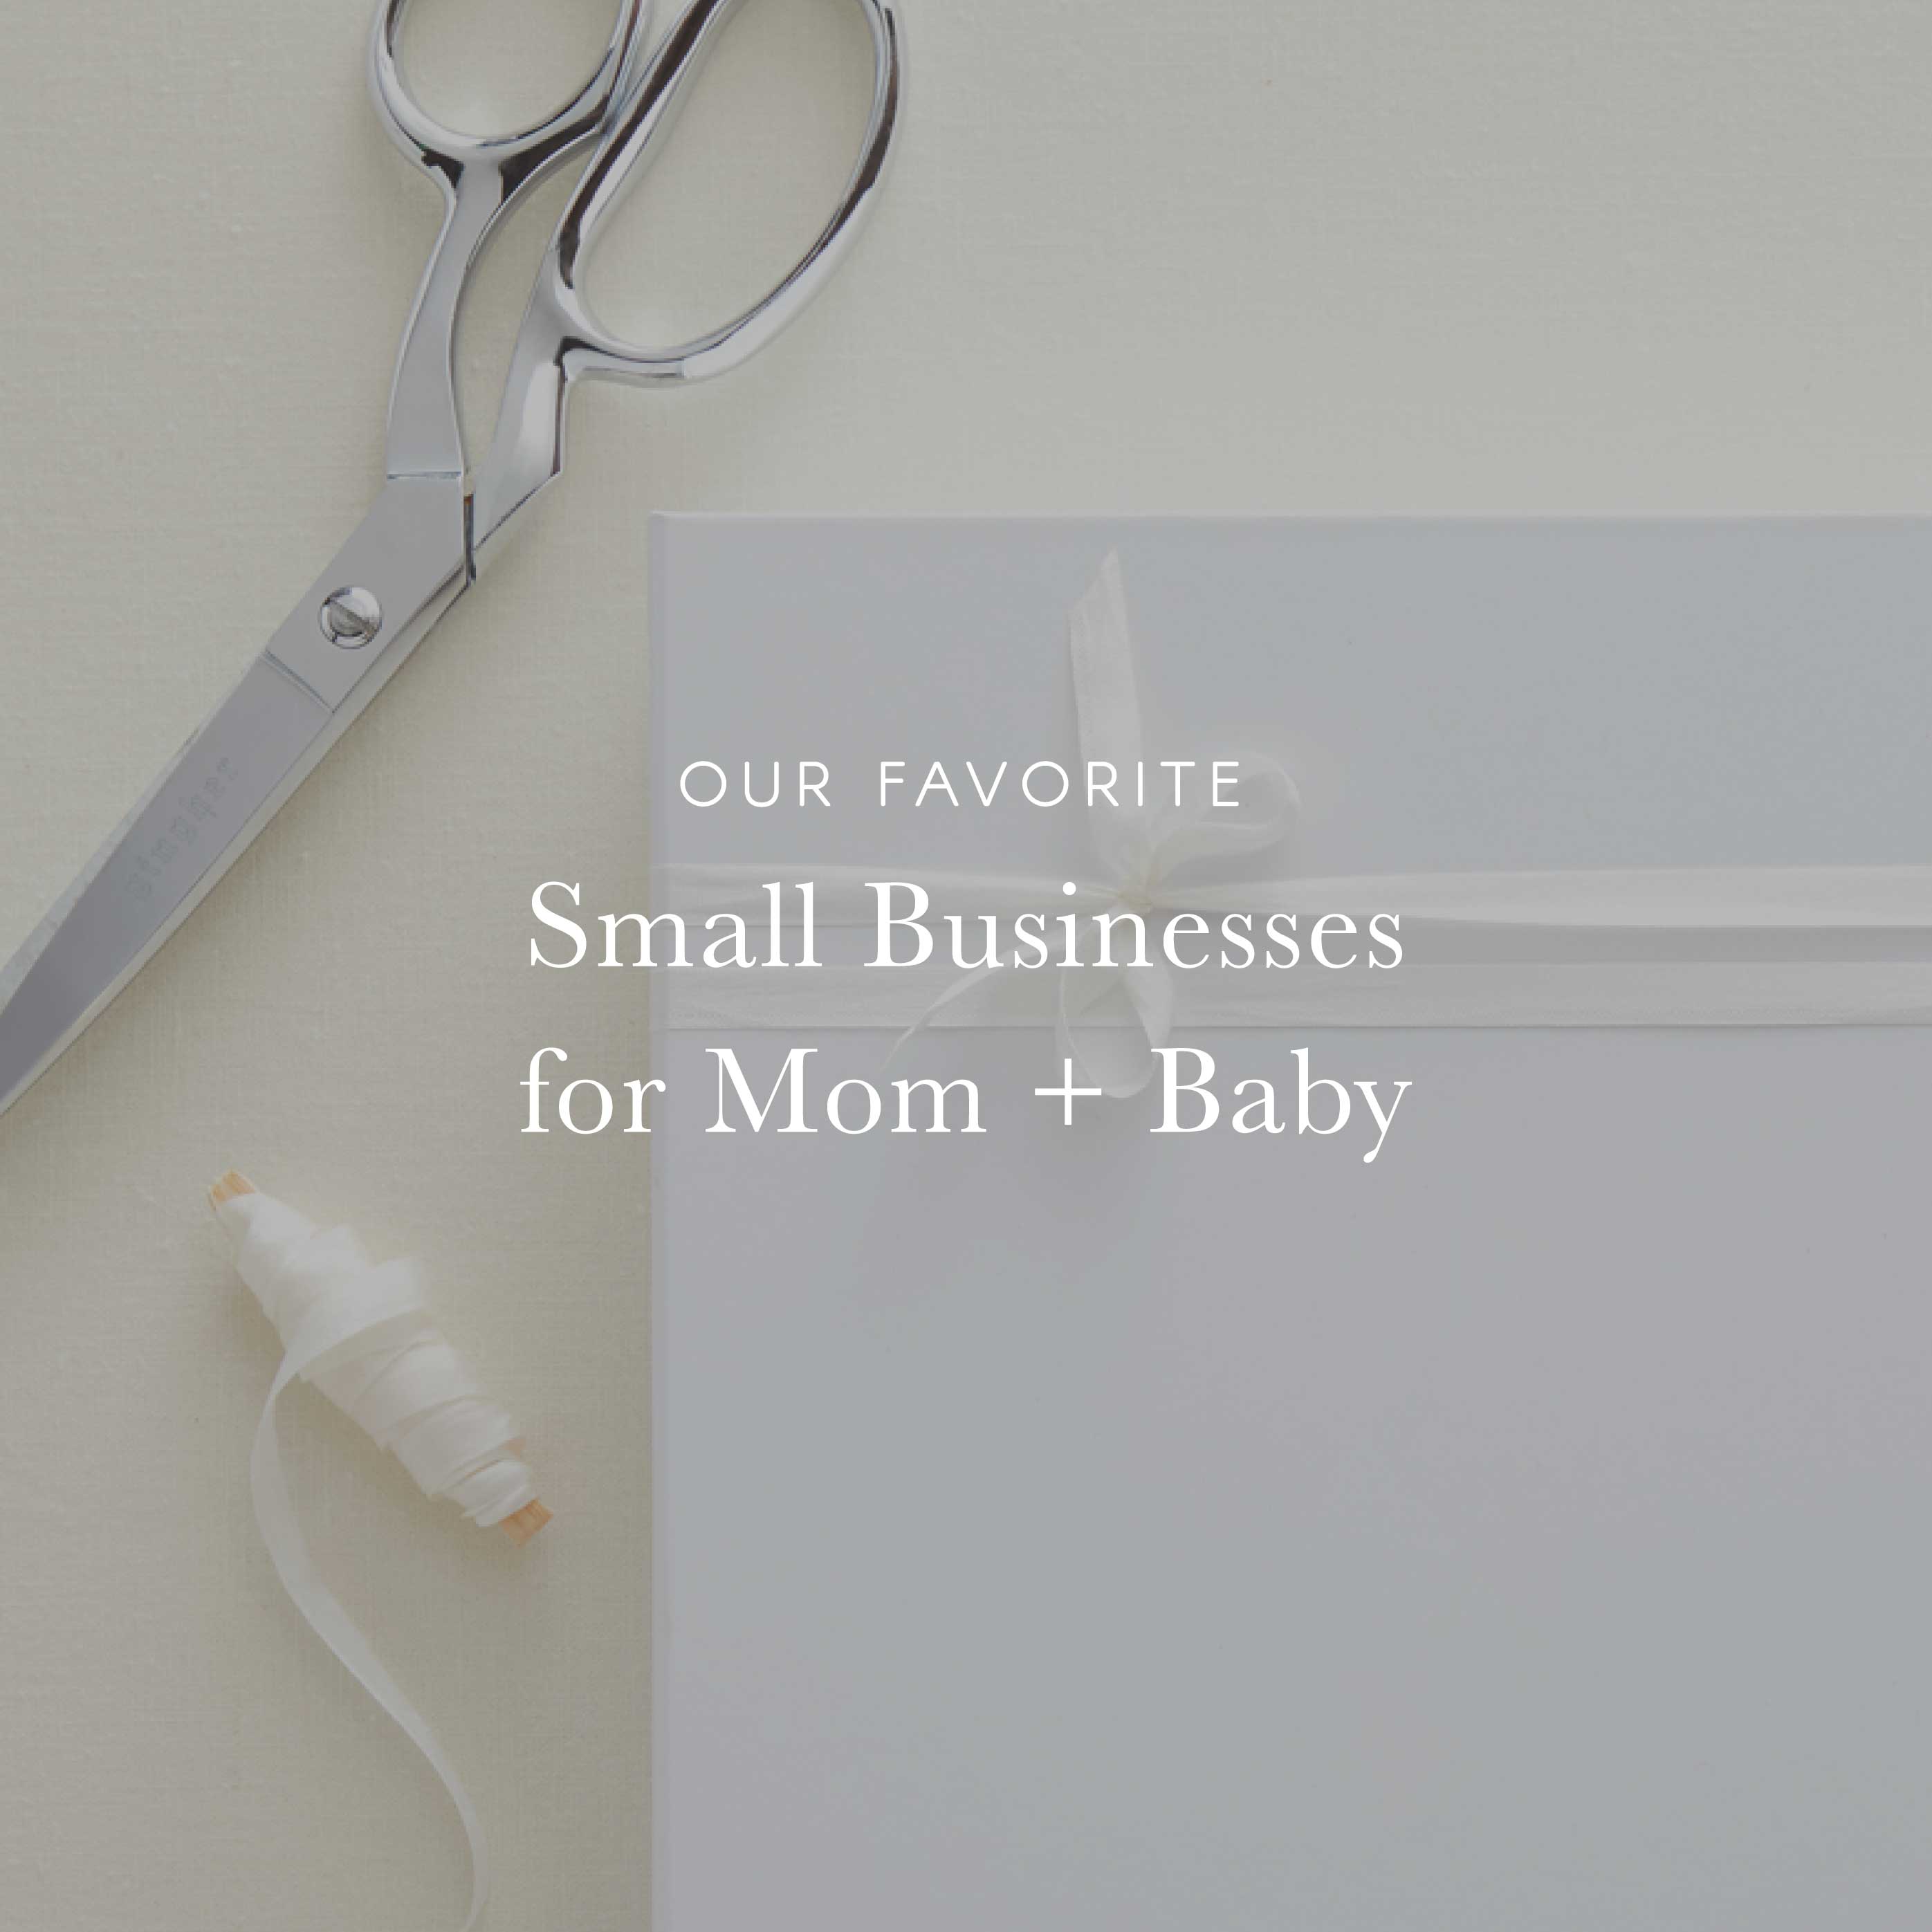 Our Favorites Small Businesses for Mom + Baby